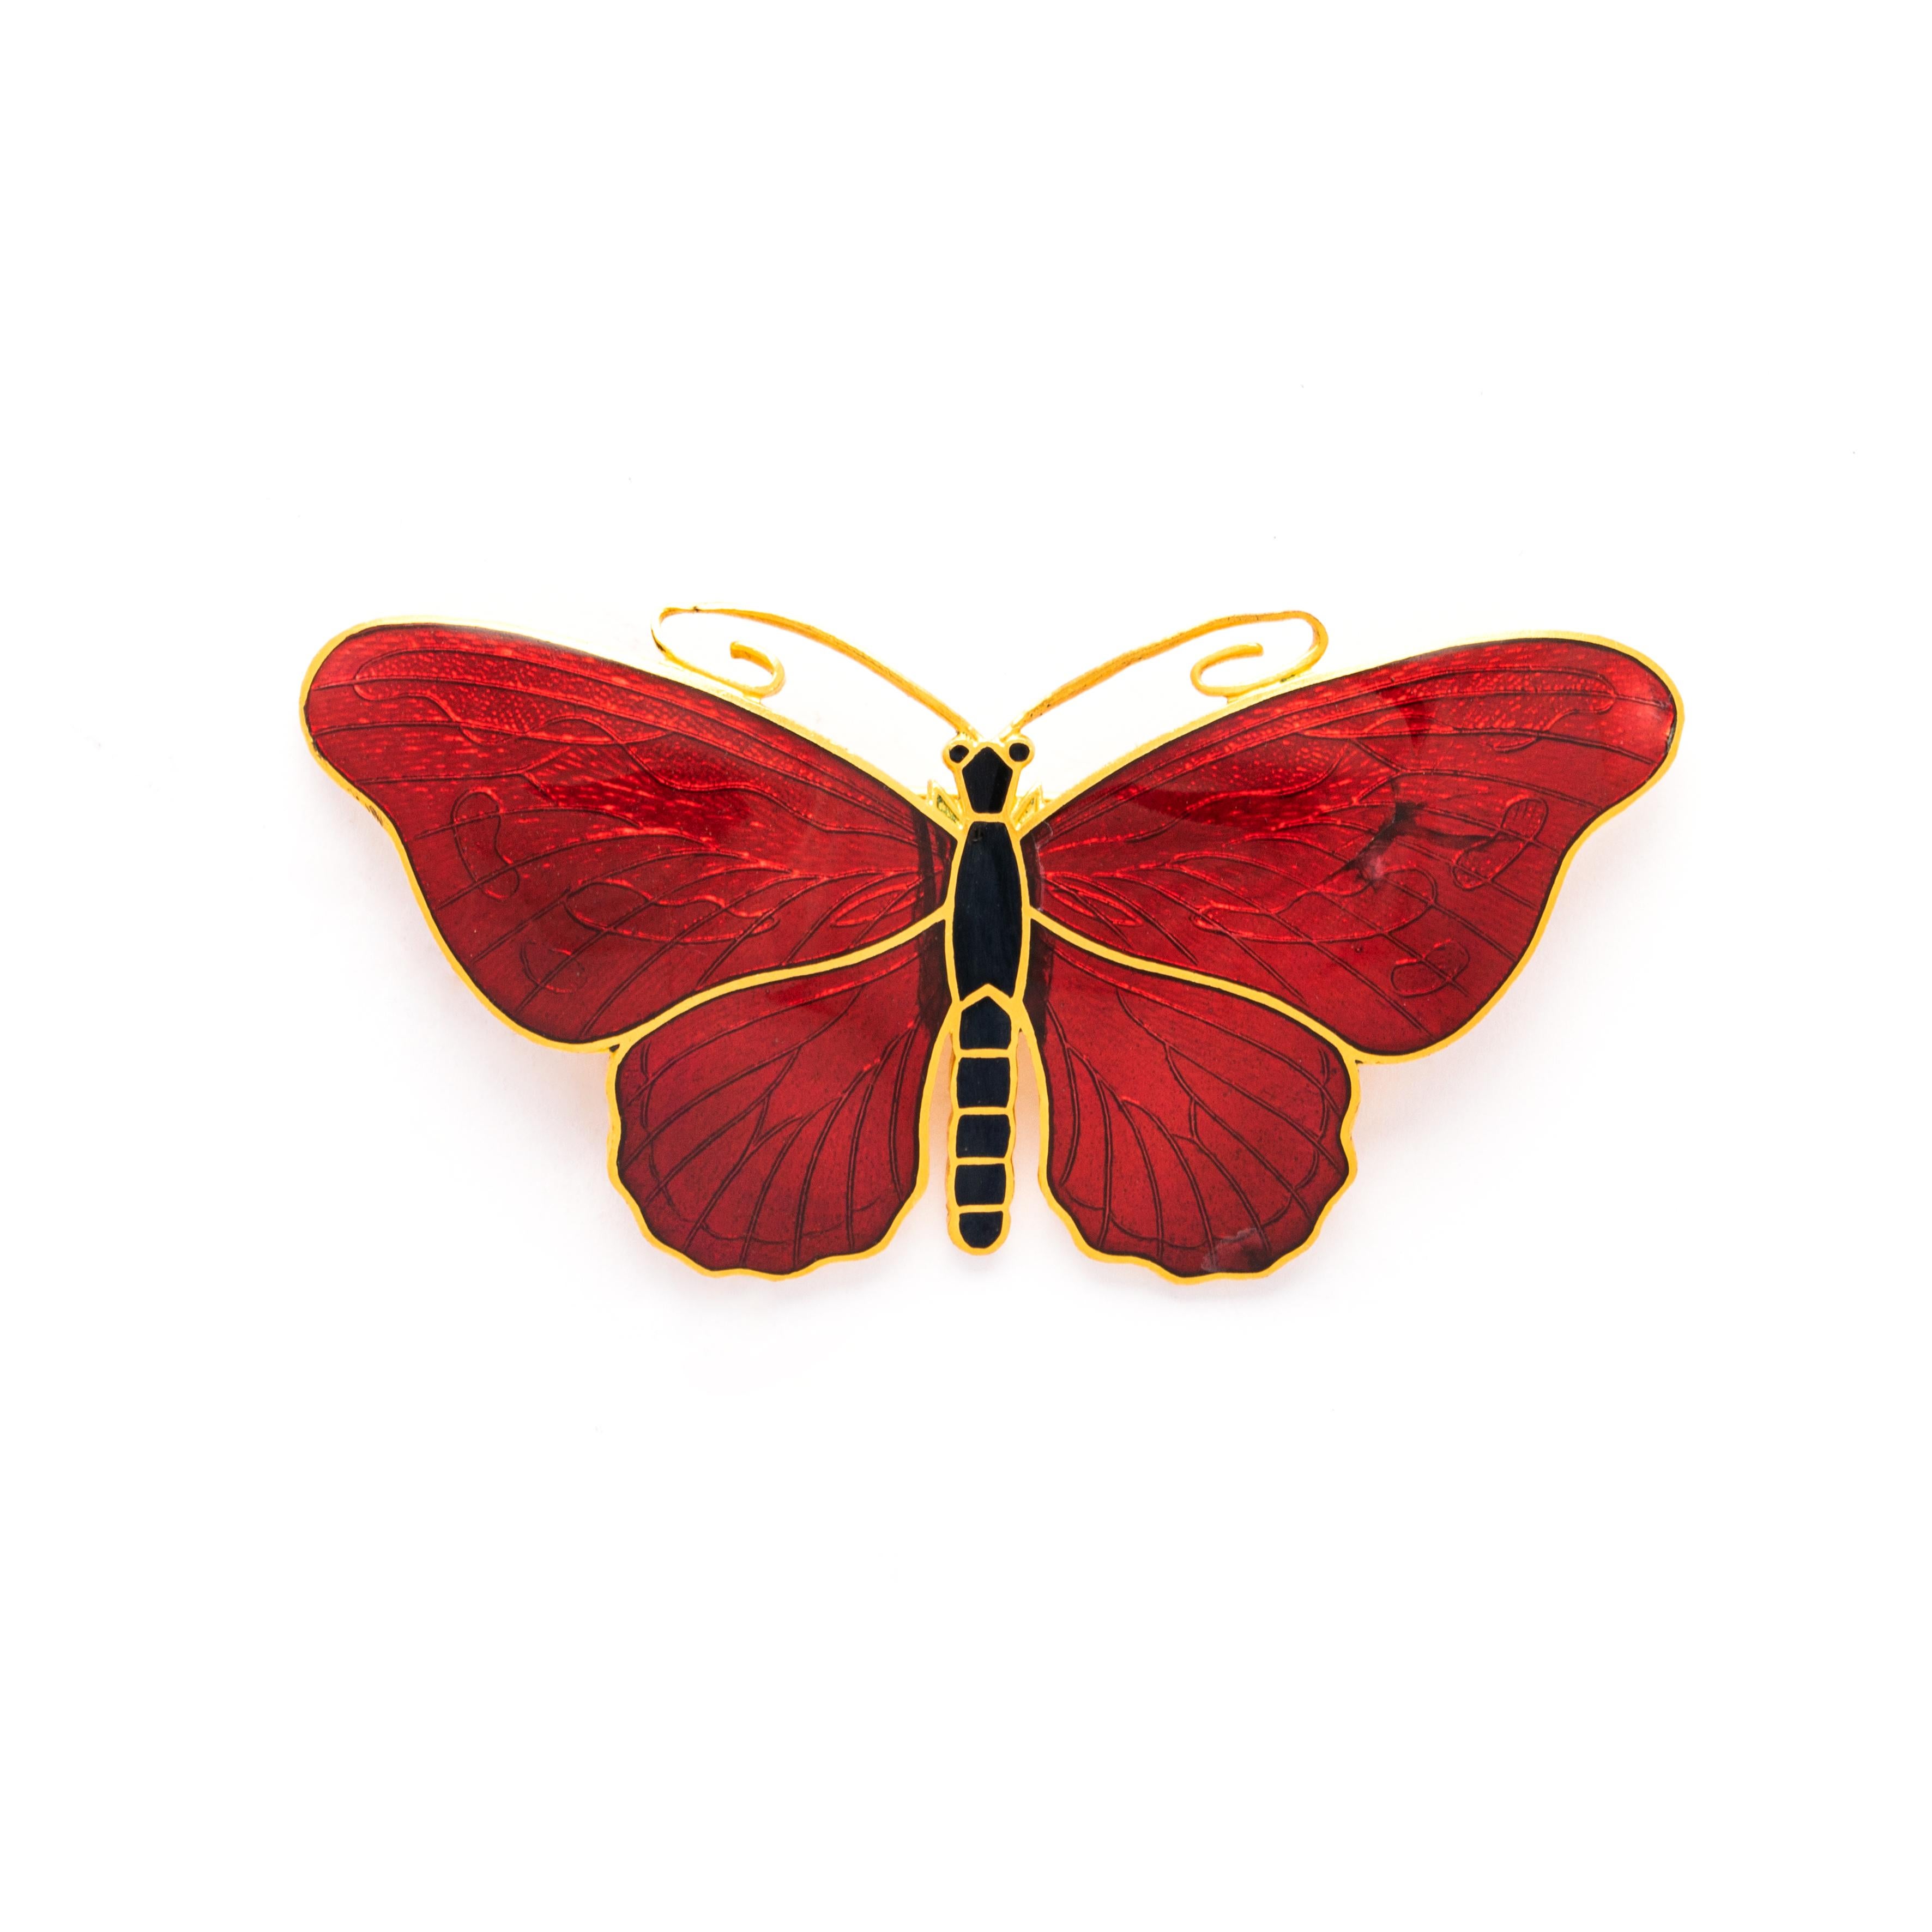 Butterfly Brooch enameled on yellow metal.
Total weight: 14.05 grams.
Dimensions: 6.10 x 3.00 centimeters.

Signed CC. Sporrong and Co. 
STOCKHOLM.